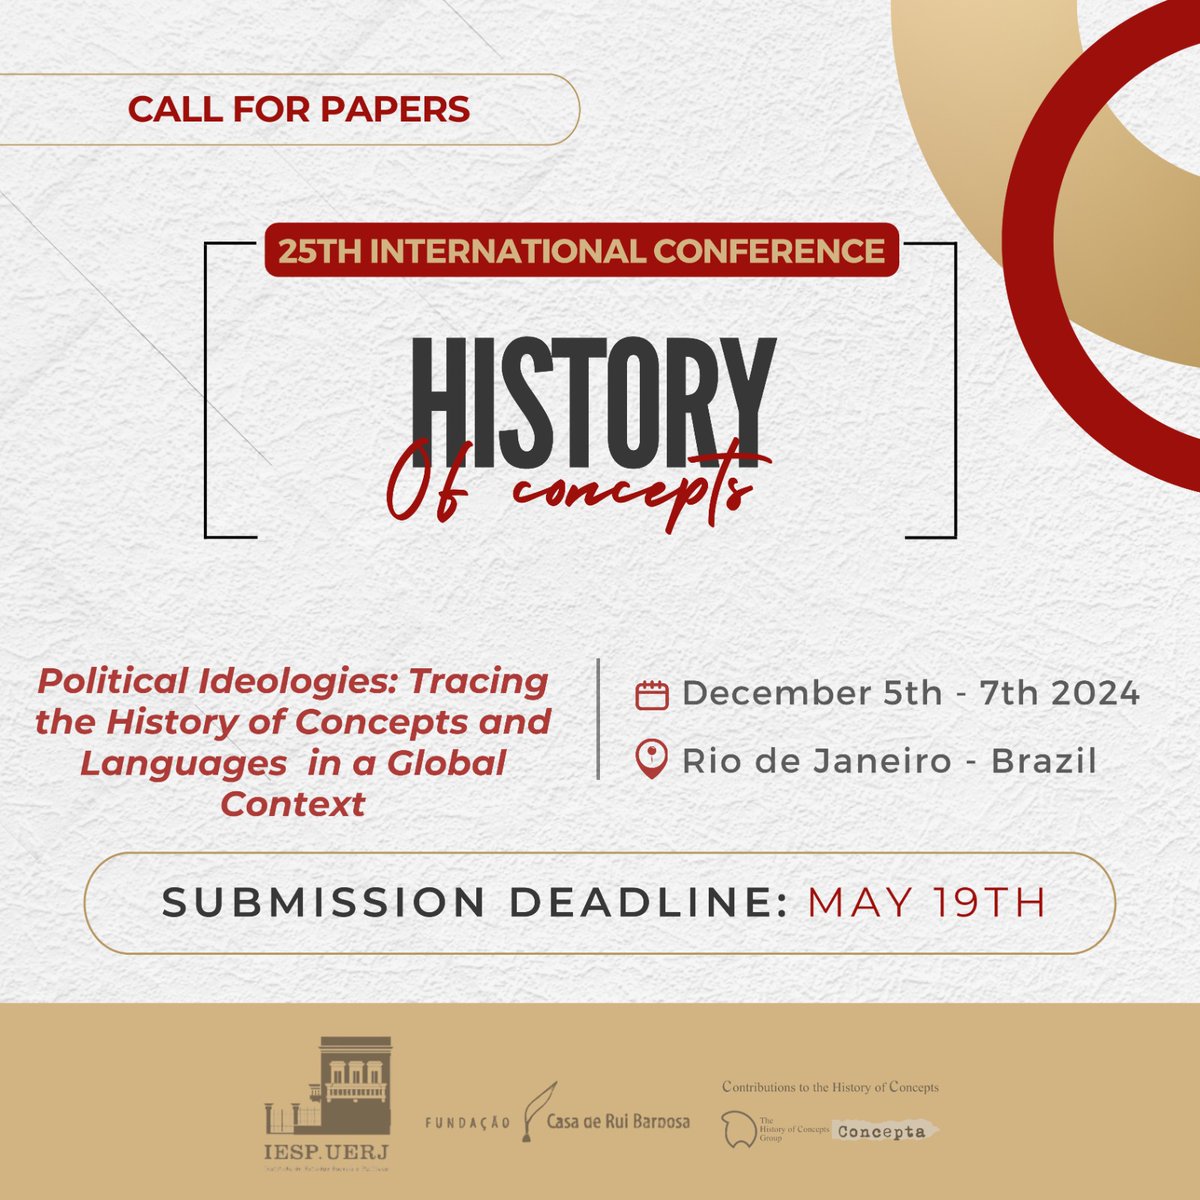 📢Reminder: the submission deadline for our conference is May 19th! More information and the #CfP down below or on our homepage bit.ly/HCG2024! 
🎊After 20 years, the International Conference on the History of Concepts returns to Rio de Janeiro – please share and apply!